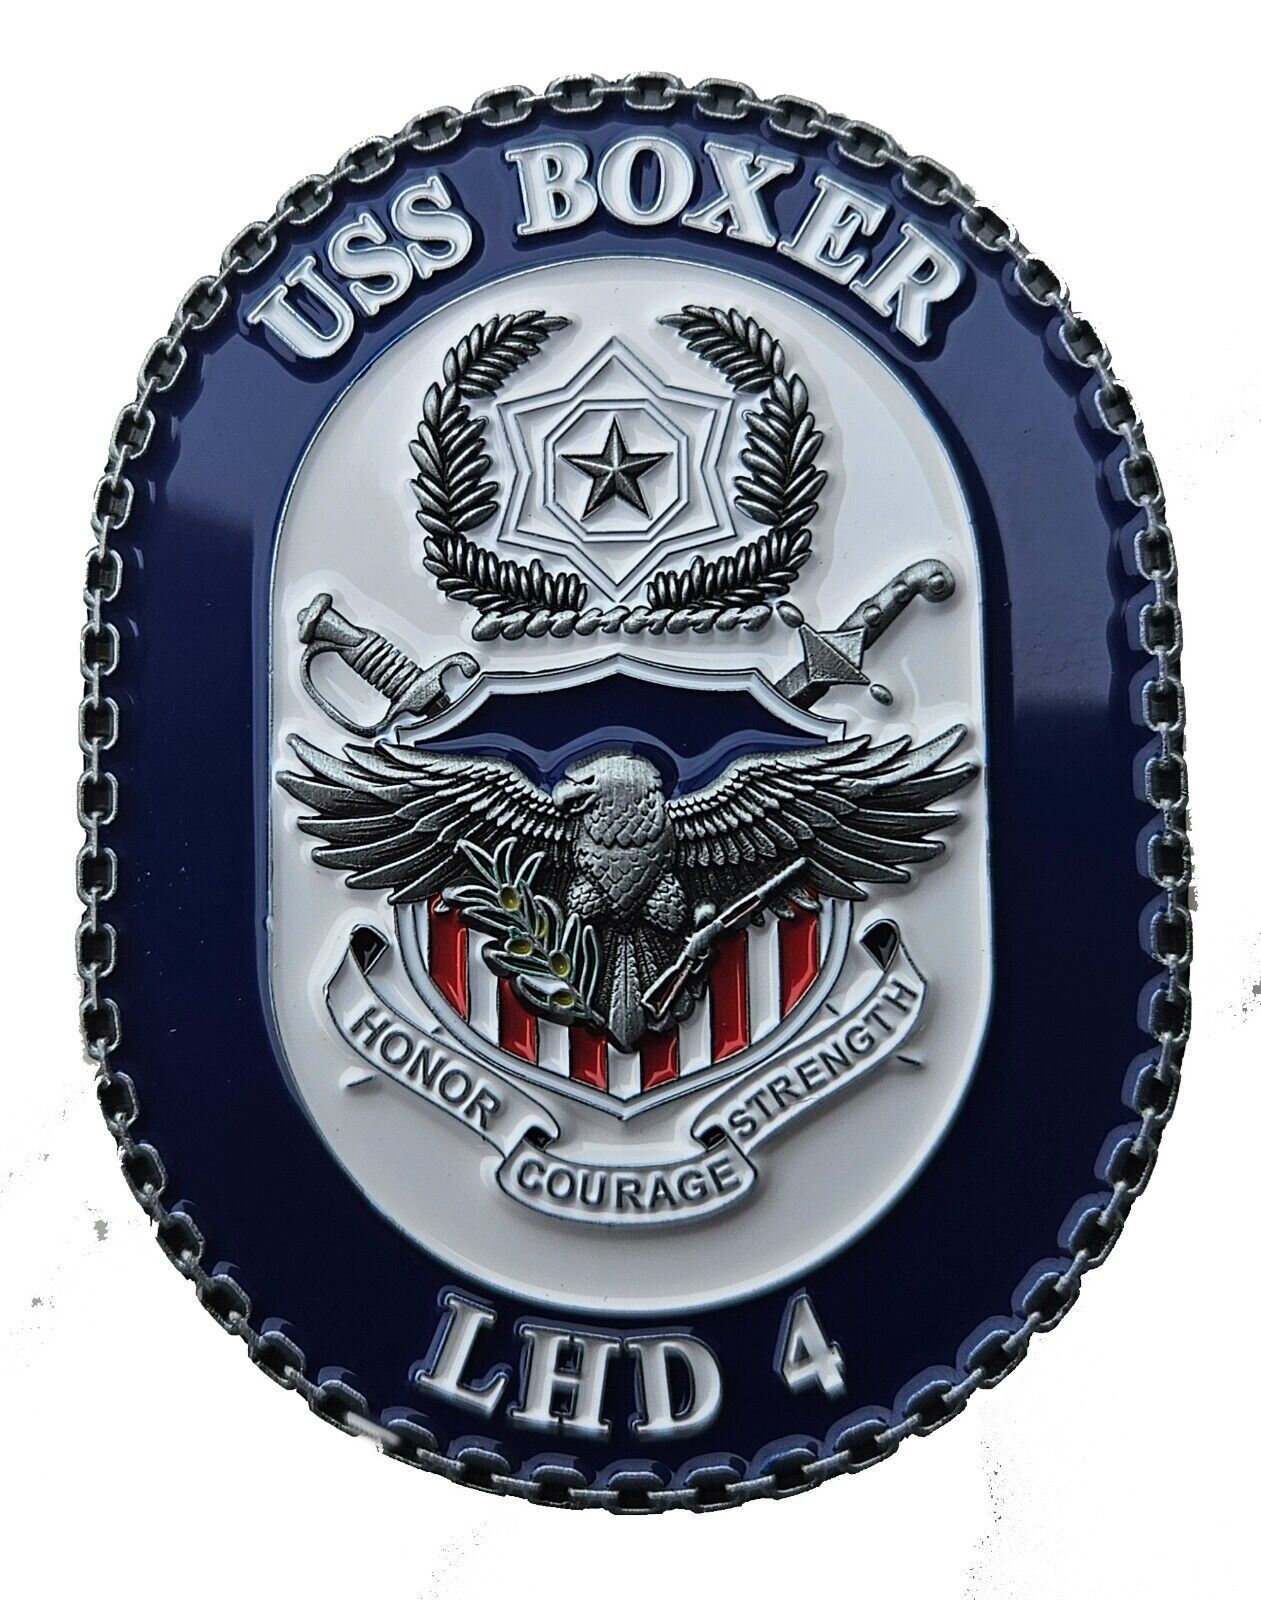 US NAVY USS BOXER LHD 4 COMMEMORATIVE CHALLENGE COIN 195